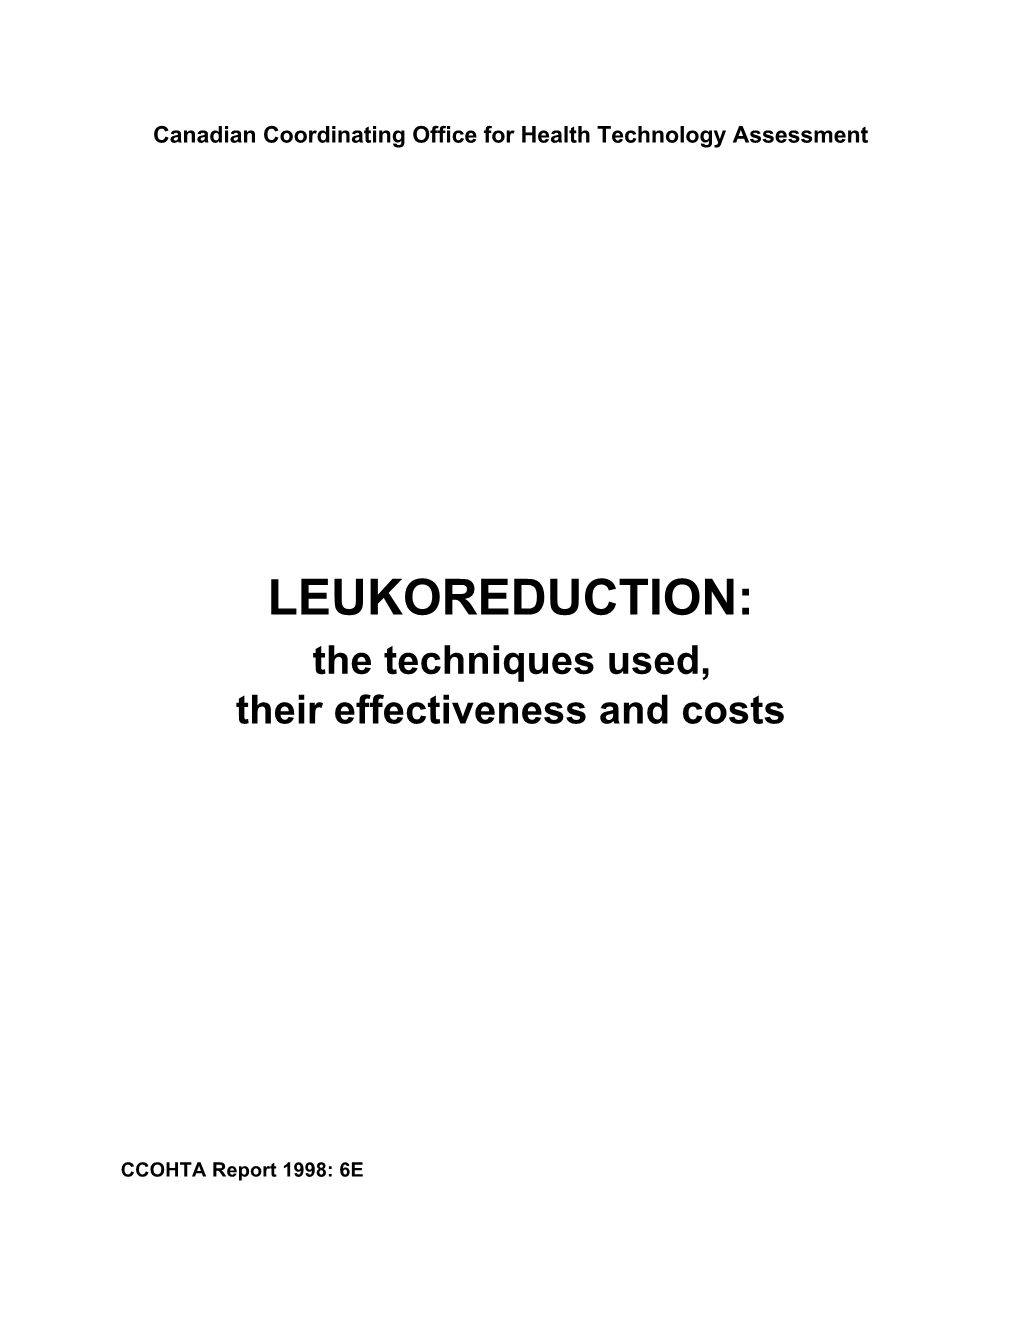 LEUKOREDUCTION: the Techniques Used, Their Effectiveness and Costs